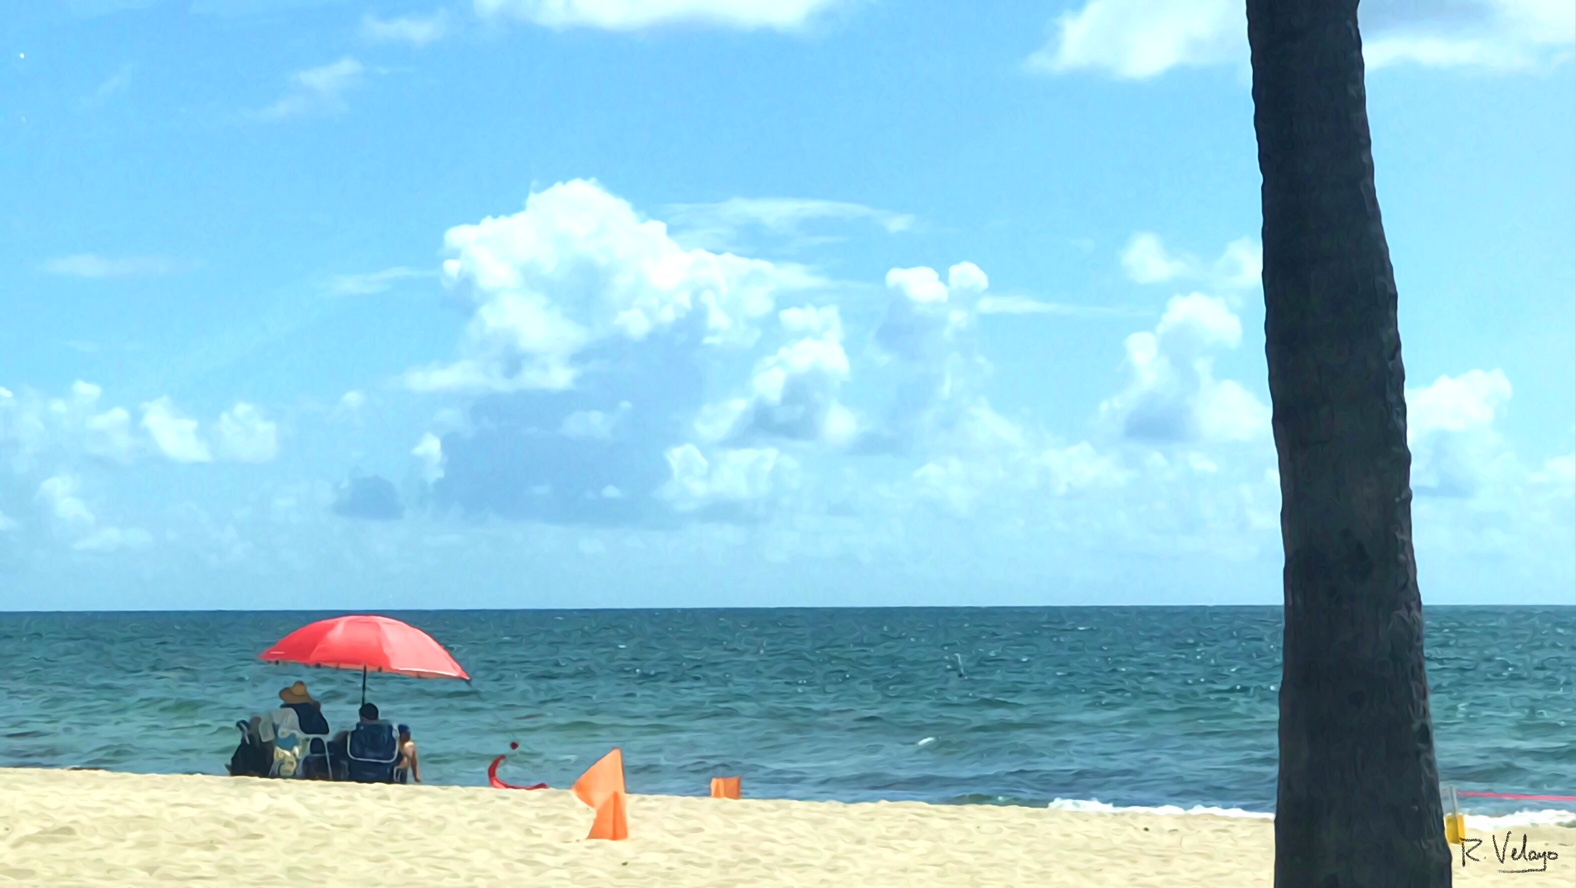 "A FAMILY’S PINK UMBRELLA ON FORT LAUDERDALE BEACH" [Created: 10/07/2021]